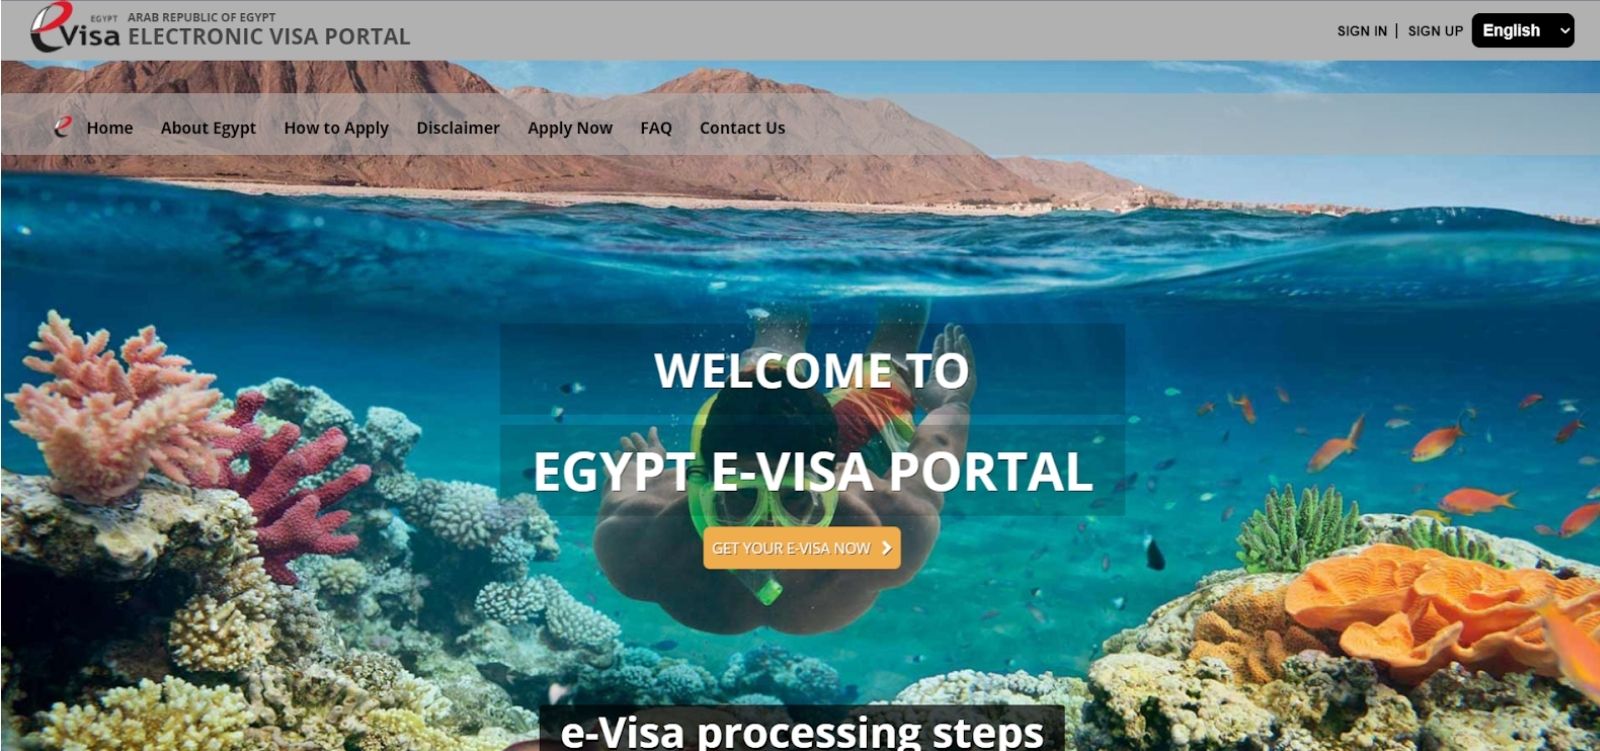 egypt tourism board contact